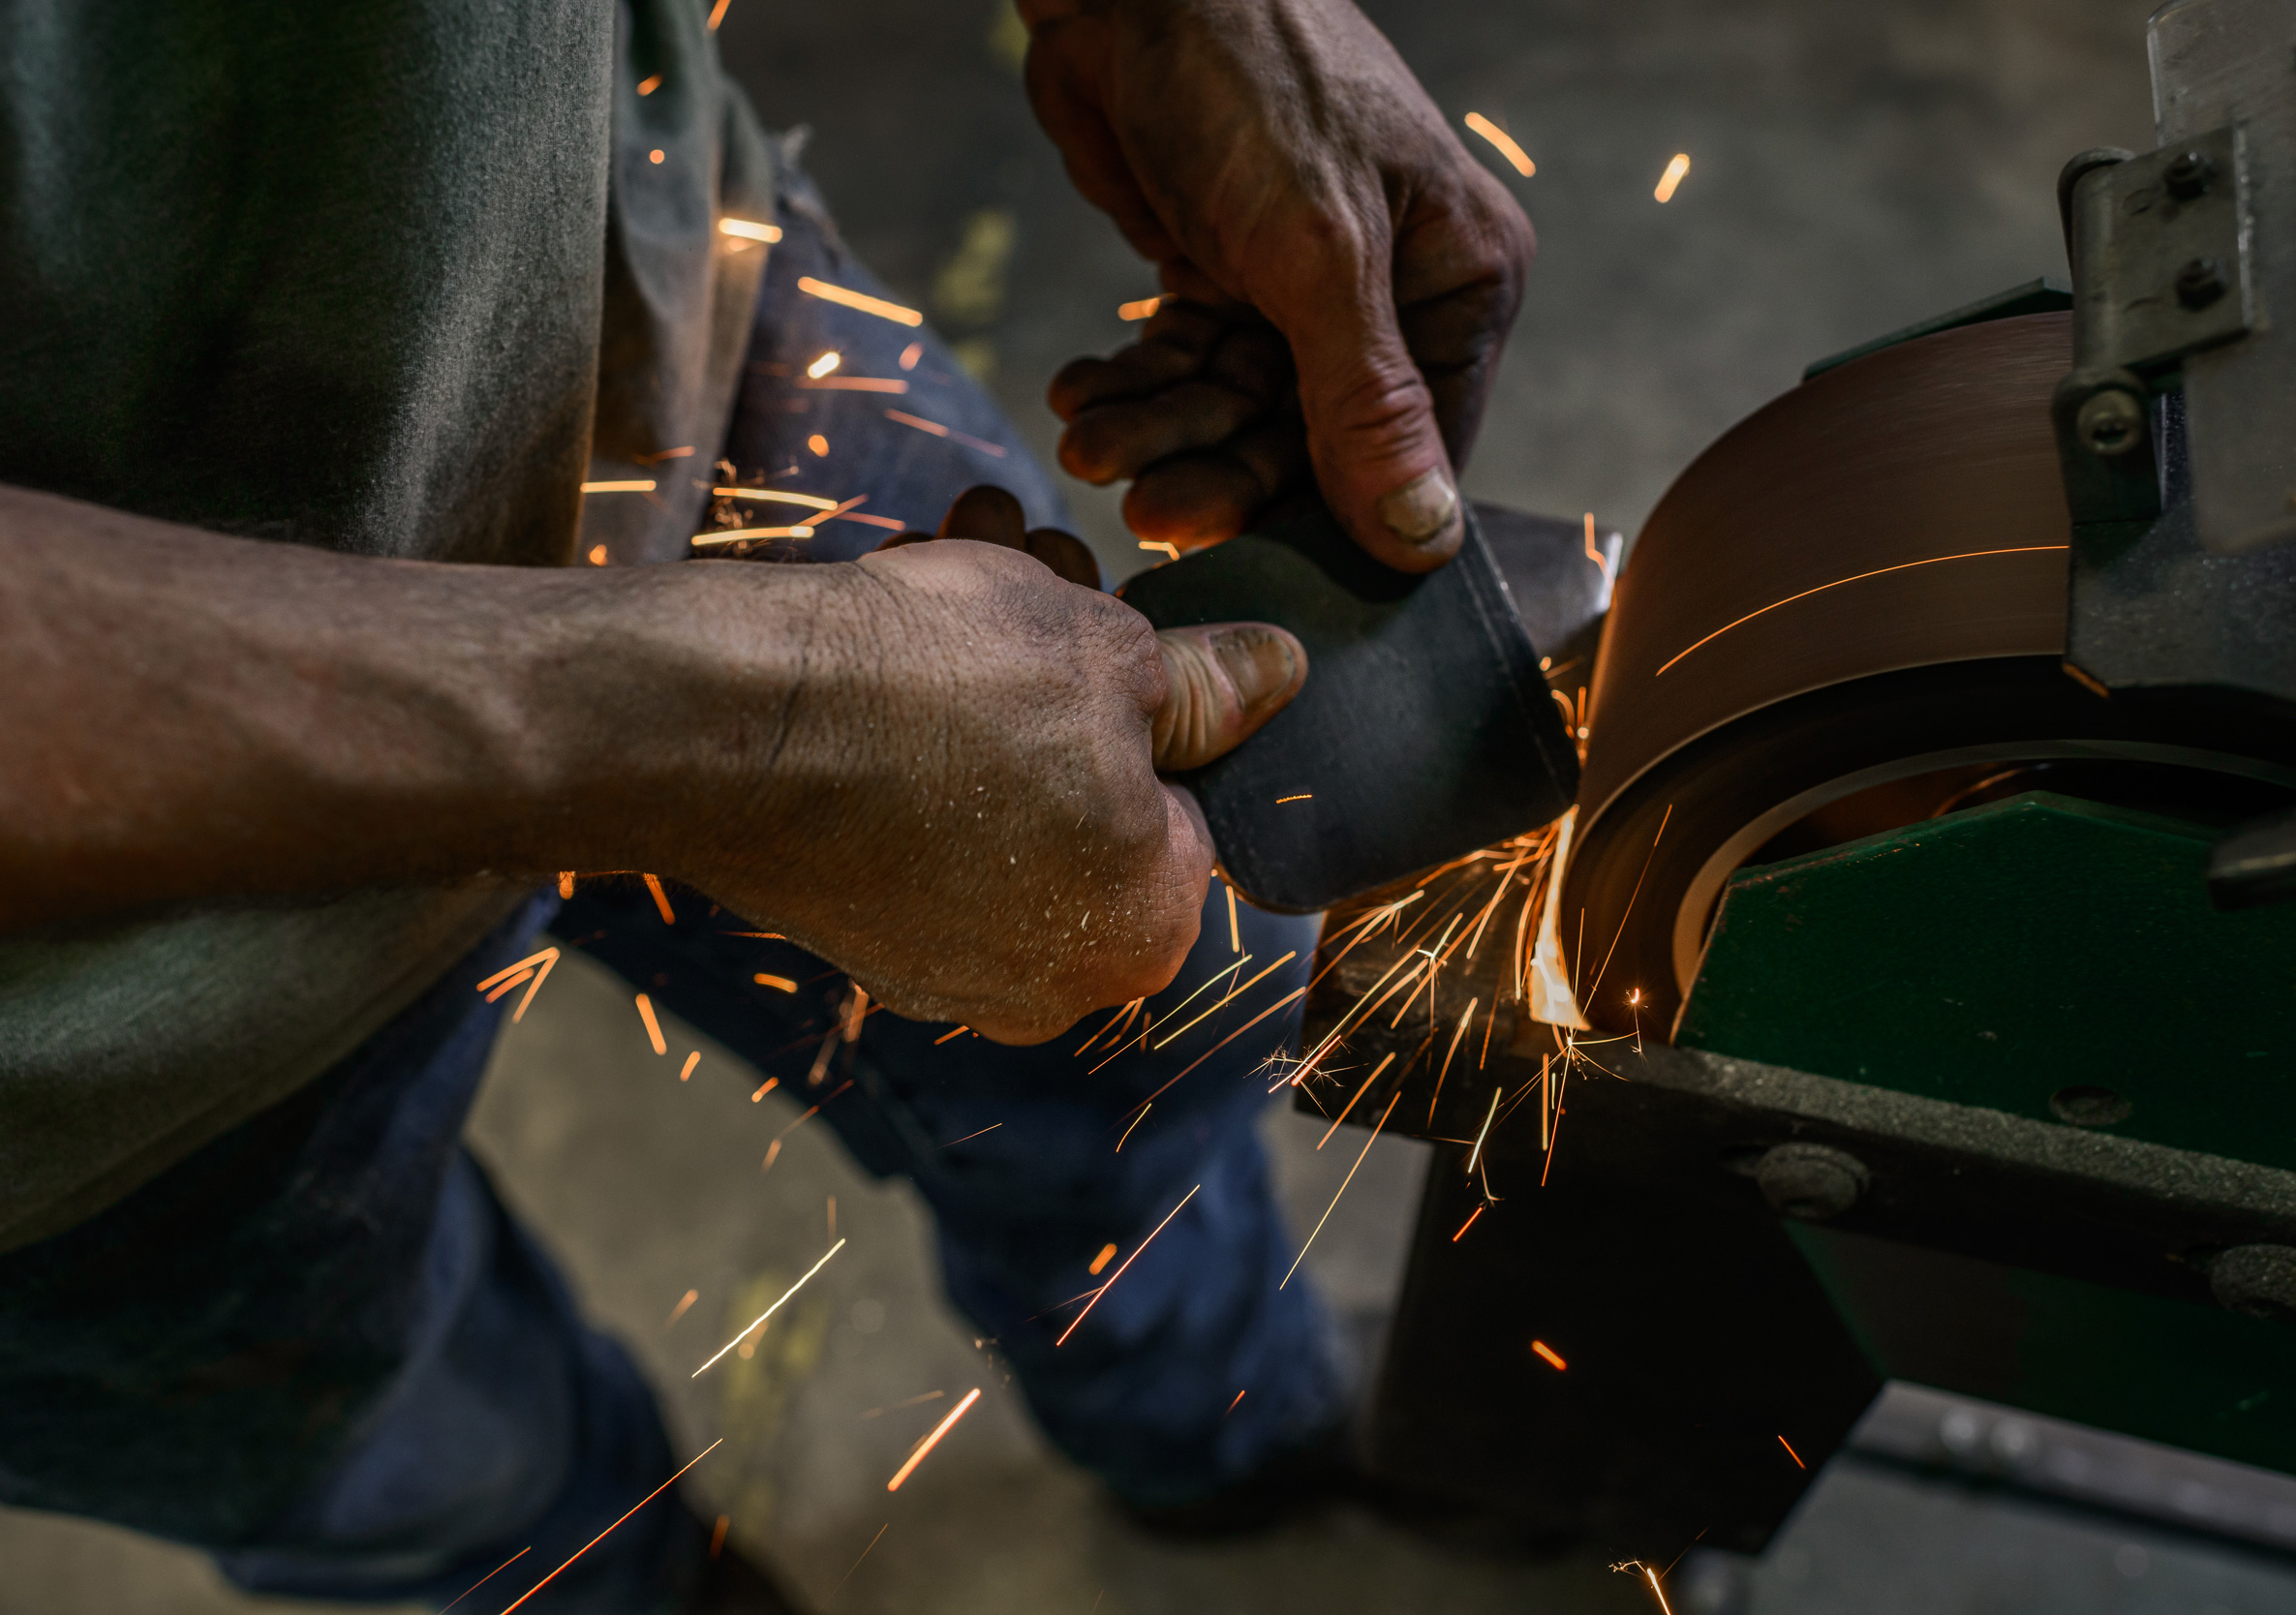 Male hands at work using a grinder in an industrial work shop